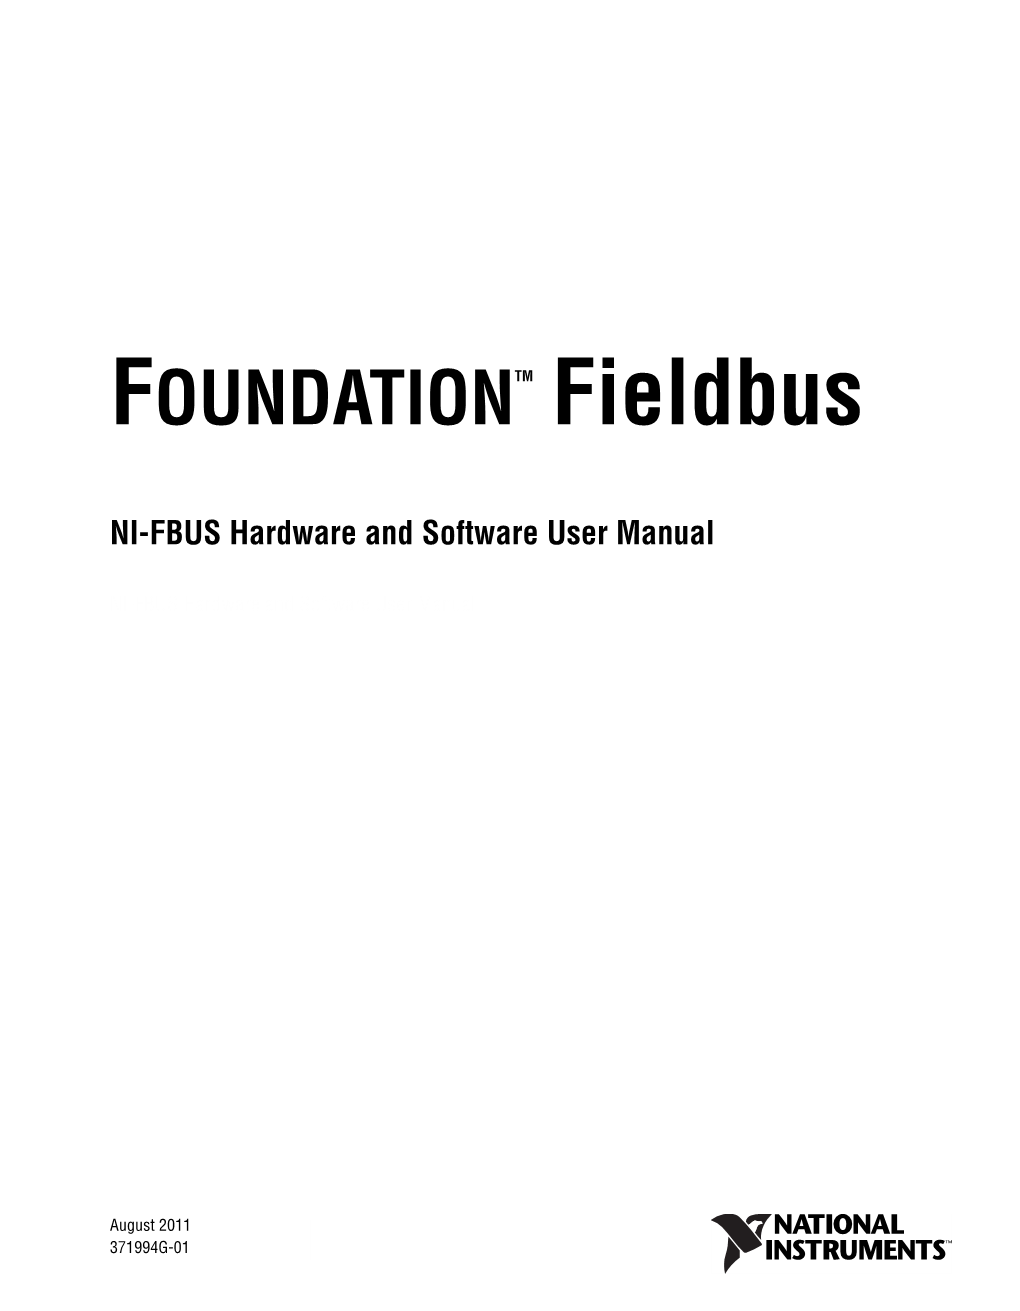 NI-FBUS Hardware and Software User Manual and Specifications